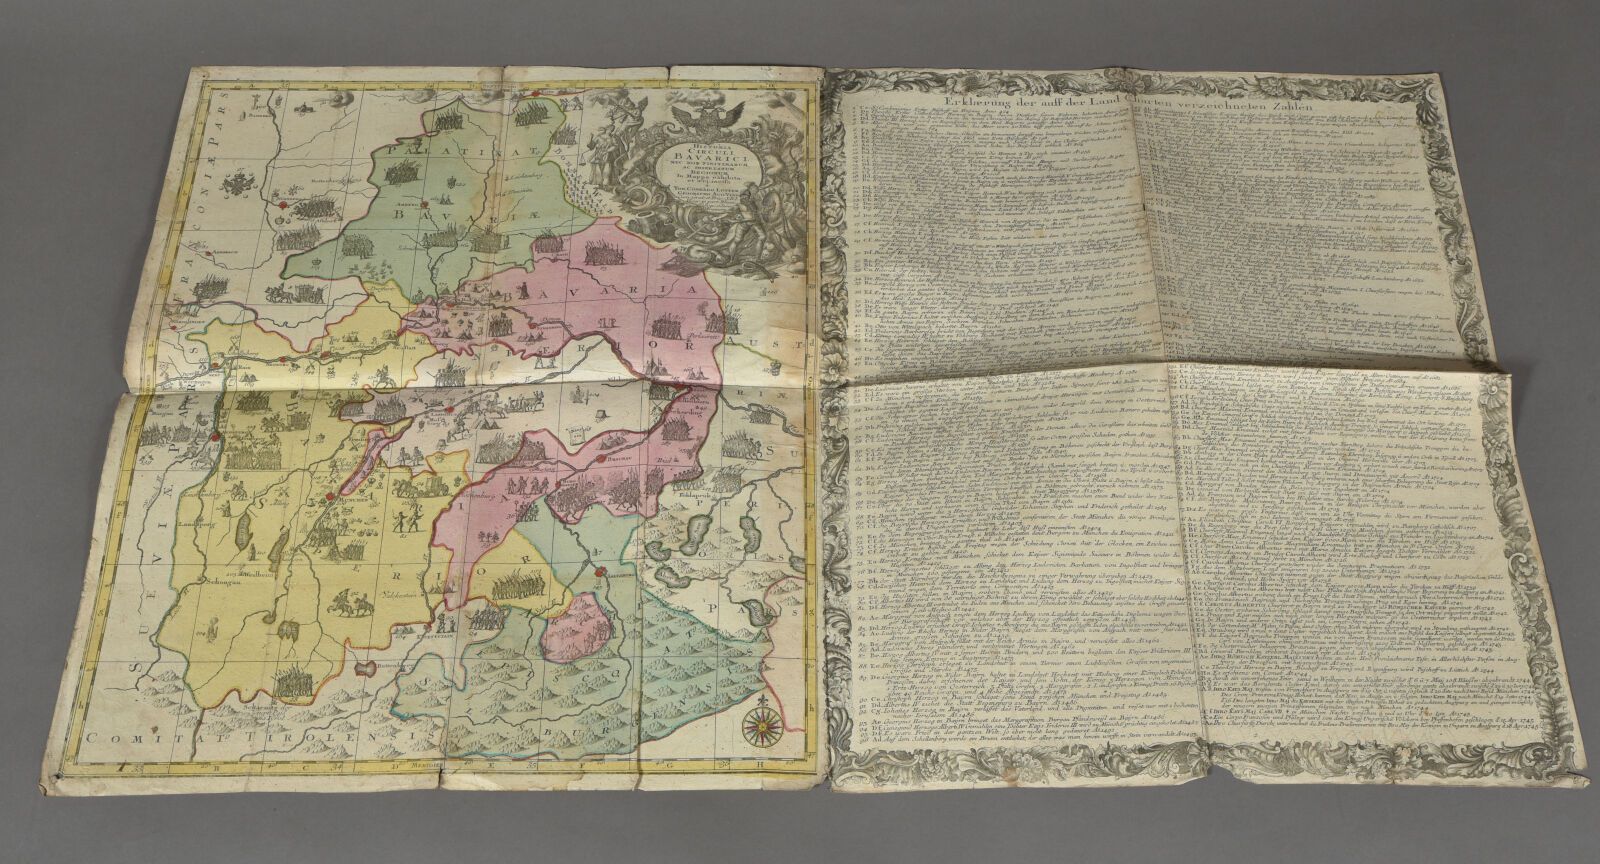 Null CONRAD LOTTER (Germany 1717 - 1777)
Historical map of Bavaria. About 1700. &hellip;